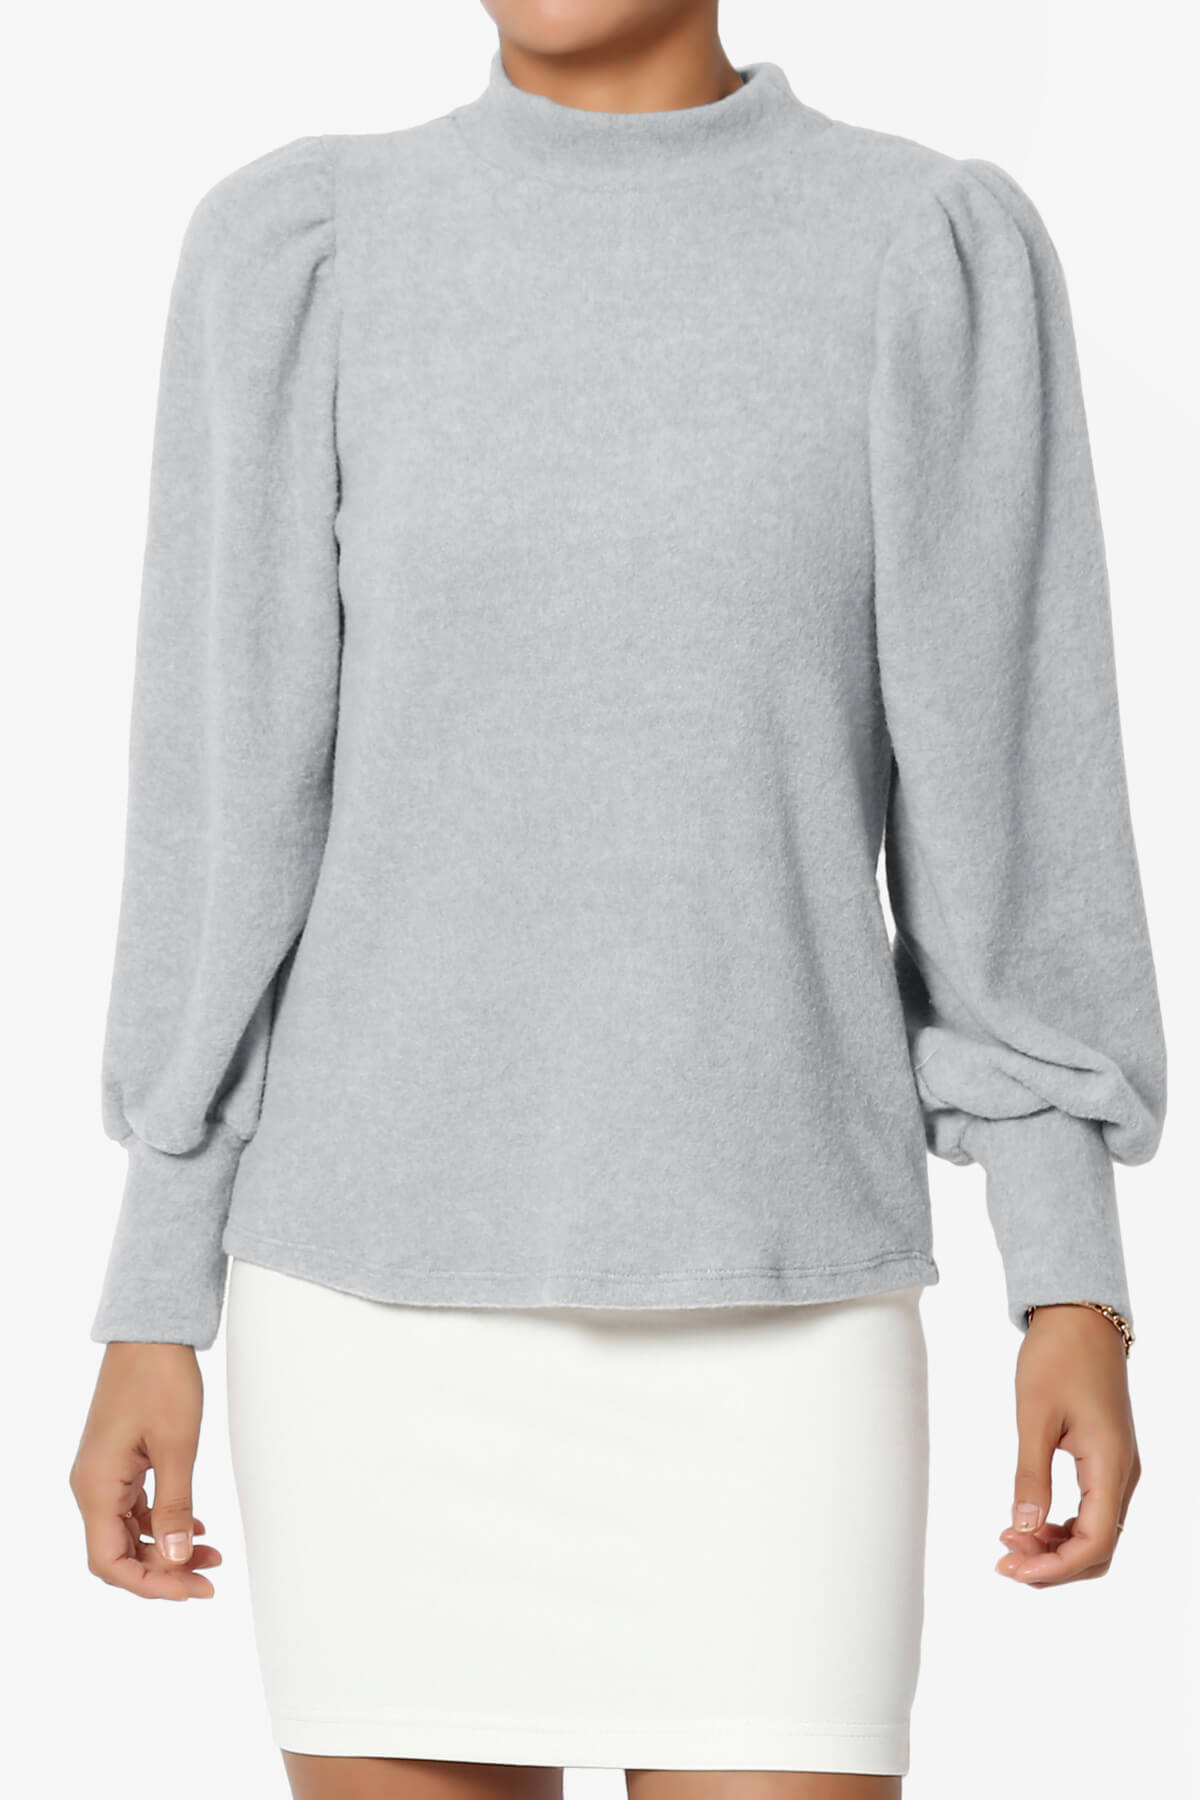 Load image into Gallery viewer, Killa Puff Long Sleeve Mock Neck Knit Sweater HEATHER GREY_1
